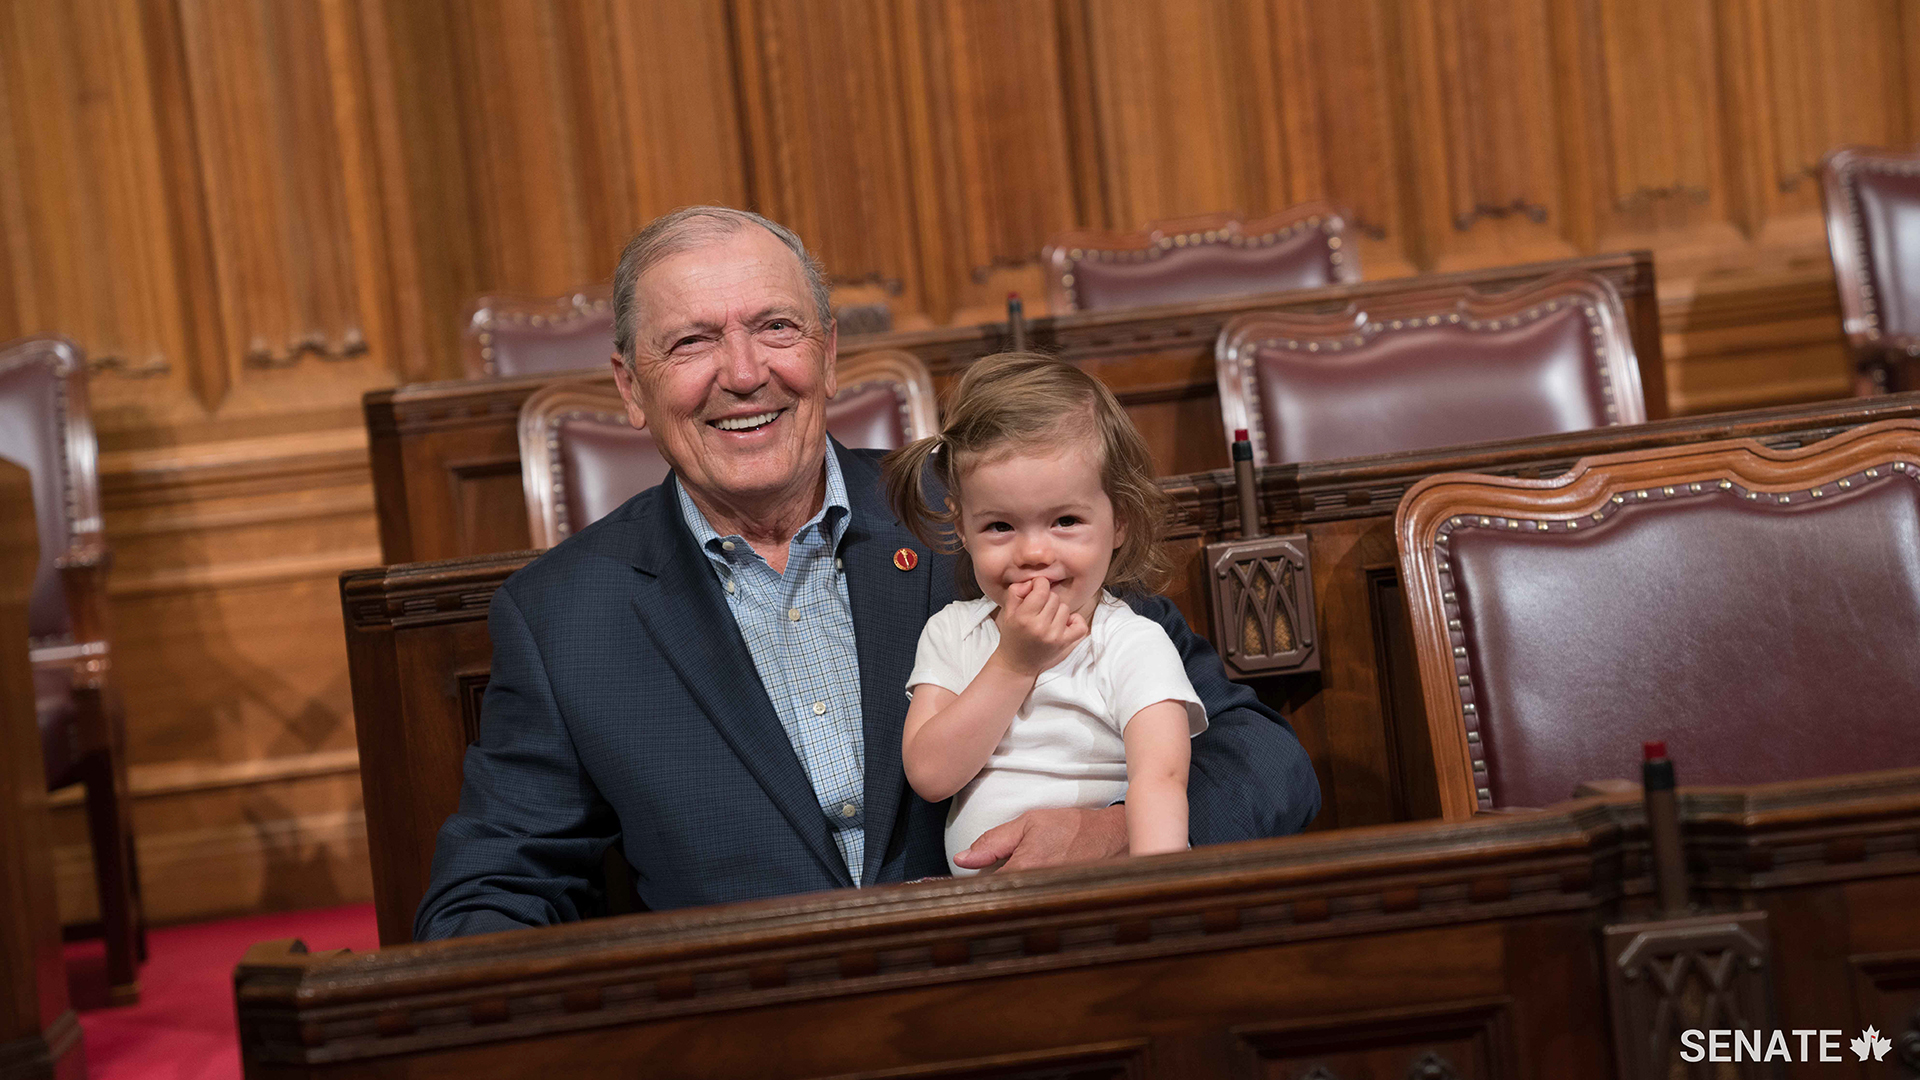 Senator Tkachuk and his granddaughter share a smile and a cuddle in the Senate Chamber in 2017. He looks forward to spending more time with his family during his retirement.